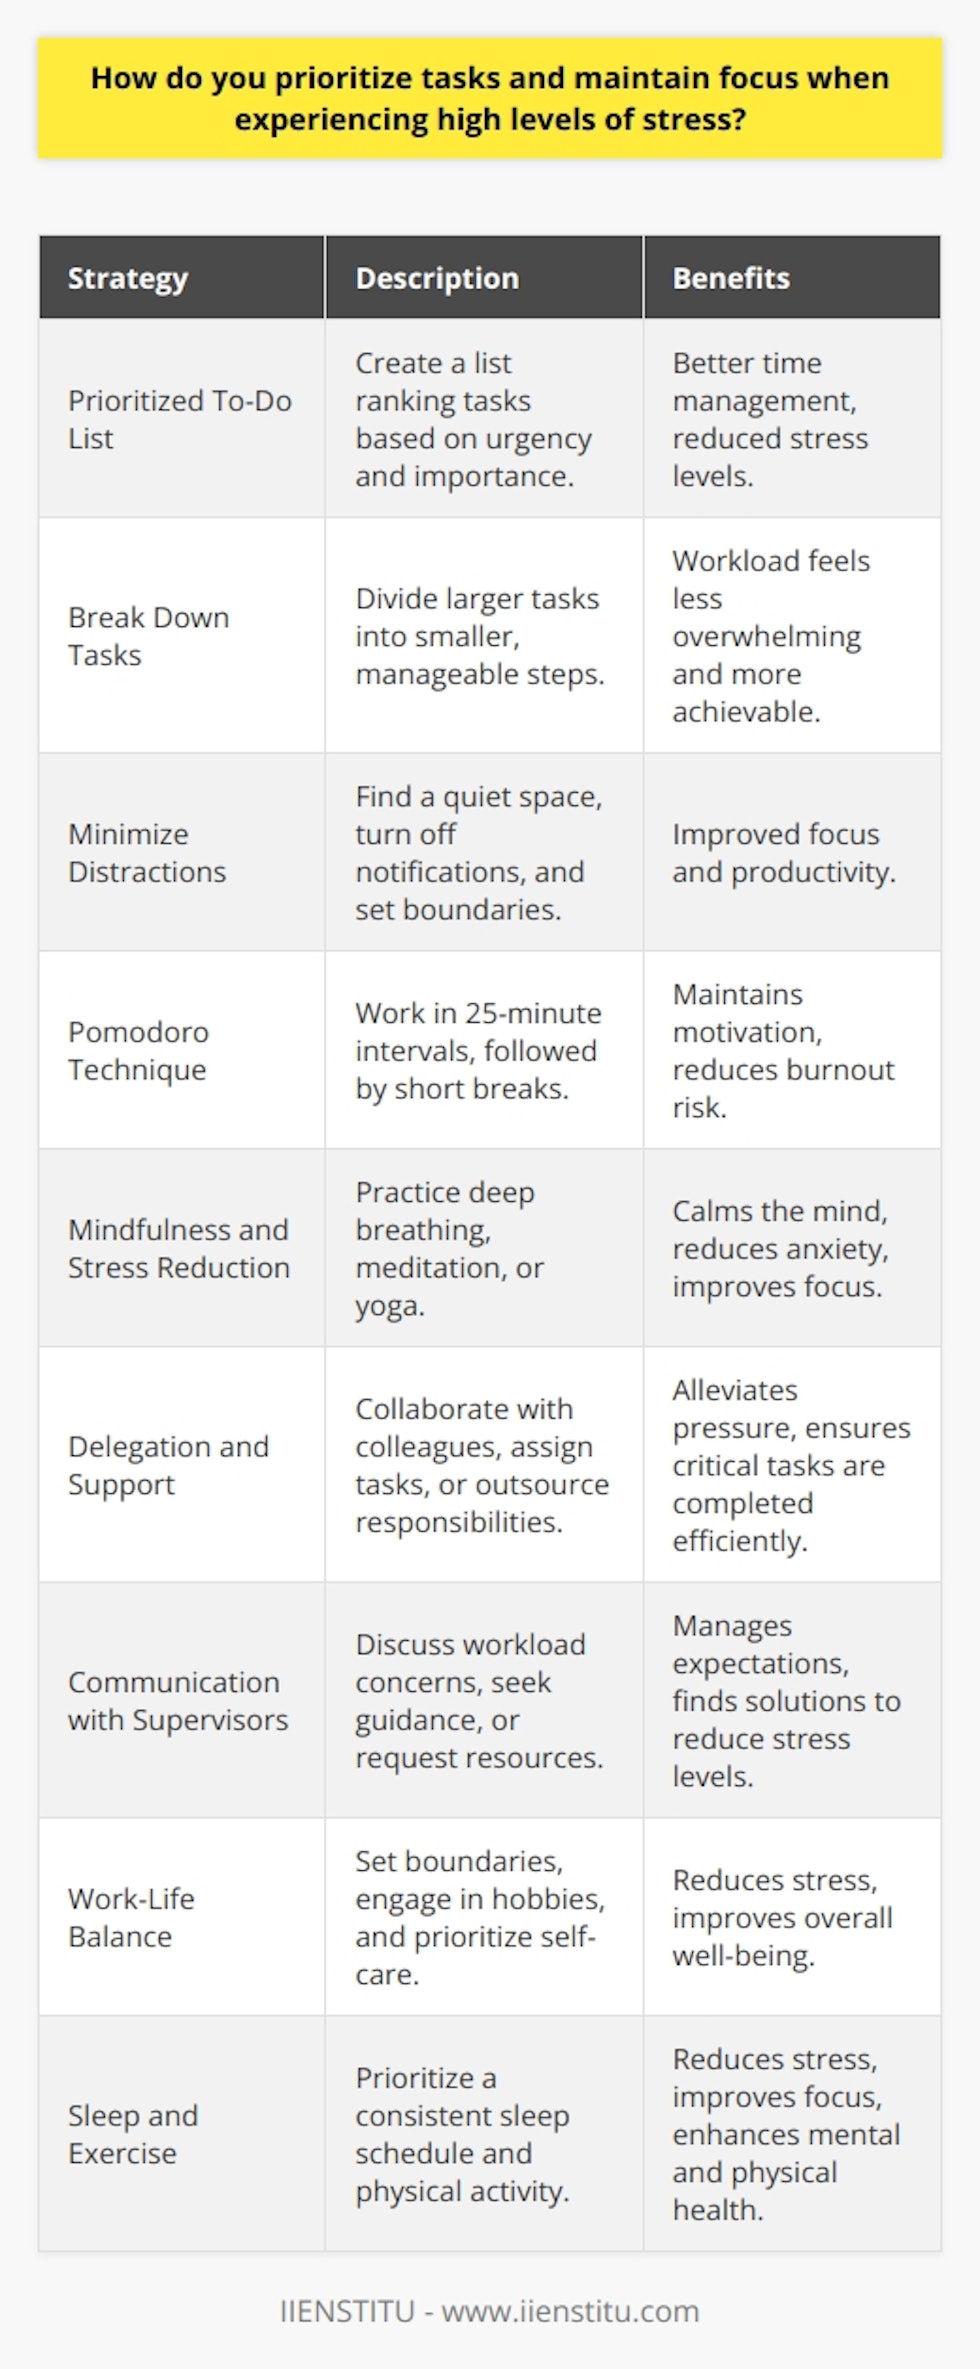 Prioritizing tasks and maintaining focus during high-stress periods is crucial for productivity and well-being. One effective strategy is to create a prioritized to-do list, ranking tasks based on urgency and importance. This helps to identify critical tasks that require immediate attention, allowing for better time management and reduced stress levels. Breaking larger tasks into smaller, manageable steps can also make the workload feel less overwhelming and more achievable. Techniques for Maintaining Focus To maintain focus, it is essential to minimize distractions and create a conducive work environment. This may involve finding a quiet space, turning off notifications on devices, and setting boundaries with colleagues or family members. Incorporating regular breaks into the workday can also help to recharge and refocus the mind, ultimately increasing productivity and reducing stress. The Pomodoro Technique The Pomodoro Technique is a popular time management method that can help maintain focus. This technique involves working in 25-minute intervals, followed by short breaks. After completing four intervals, a longer break is taken. This approach can help to break down tasks into manageable chunks, maintain motivation, and reduce the risk of burnout. Mindfulness and Stress Reduction Practicing mindfulness and stress-reduction techniques can also be beneficial when experiencing high levels of stress. Deep breathing exercises, meditation, or yoga can help to calm the mind, reduce anxiety, and improve overall focus. Incorporating these practices into daily routines can help to build resilience and better manage stress in the long term. Delegating and Seeking Support When faced with a heavy workload and high stress levels, it is important to recognize when to delegate tasks or seek support. Collaborating with colleagues, assigning tasks to team members, or outsourcing certain responsibilities can help to alleviate pressure and ensure that critical tasks are completed efficiently. Communicating with Supervisors Open communication with supervisors or managers is also crucial during high-stress periods. Discussing workload concerns, seeking guidance, or requesting additional resources can help to manage expectations and find solutions to reduce stress levels. Maintaining a Healthy Work-Life Balance Finally, maintaining a healthy work-life balance is essential for managing stress and ensuring long-term productivity. Setting clear boundaries between work and personal life, engaging in hobbies or activities that promote relaxation, and prioritizing self-care can help to reduce stress and improve overall well-being. The Importance of Sleep and Exercise Adequate sleep and regular exercise are also critical components of stress management. Prioritizing a consistent sleep schedule and incorporating physical activity into daily routines can help to reduce stress, improve focus, and enhance overall mental and physical health. By implementing these strategies and techniques, individuals can effectively prioritize tasks, maintain focus, and manage stress levels during challenging times. Developing strong time management skills, practicing self-care, and seeking support when needed can lead to increased productivity, improved well-being, and long-term success in both personal and professional life.